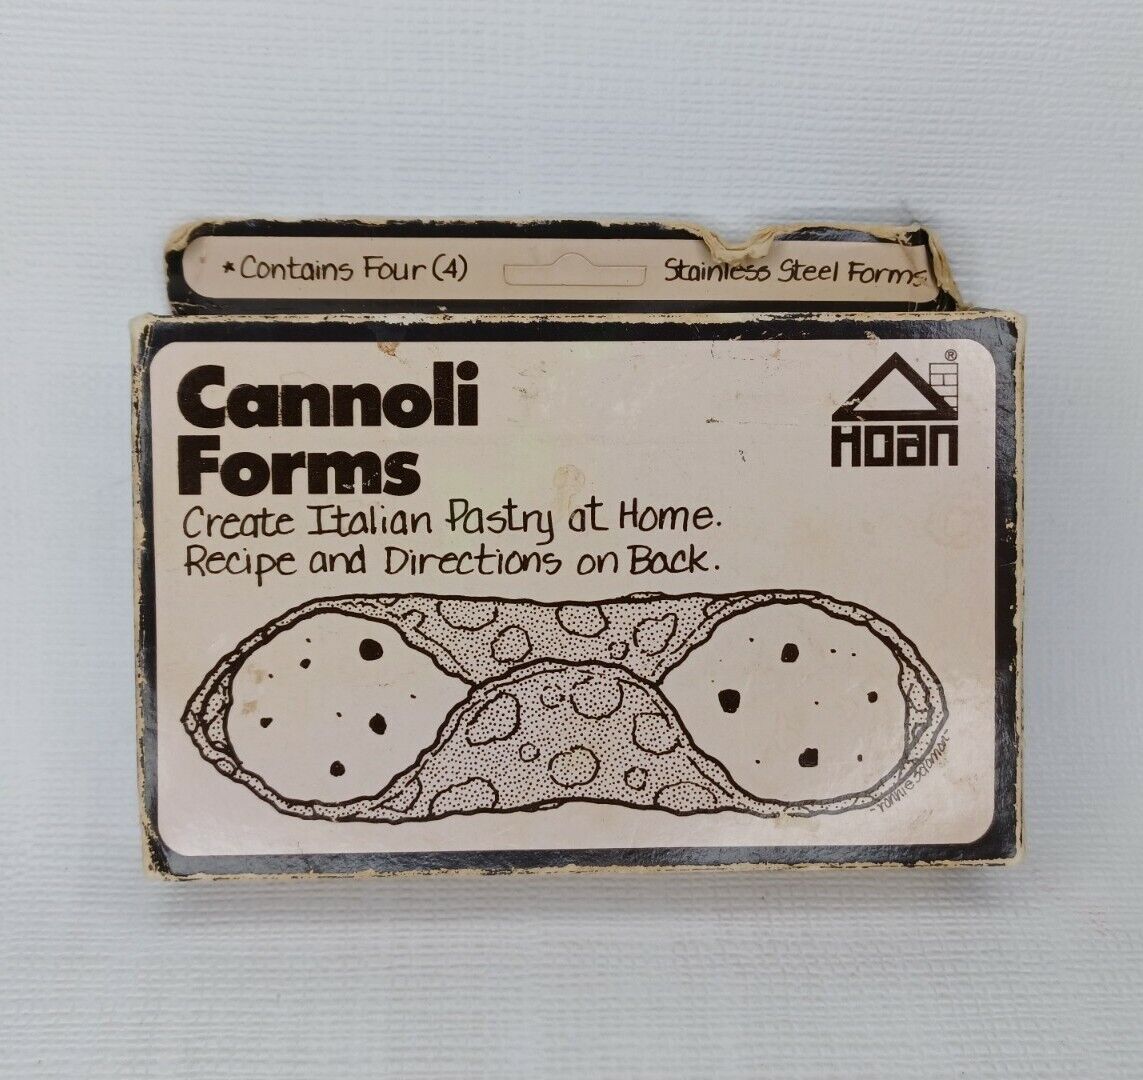 Hoan Cannoli Forms 4 In Original Box Create Italian Pastry At Home